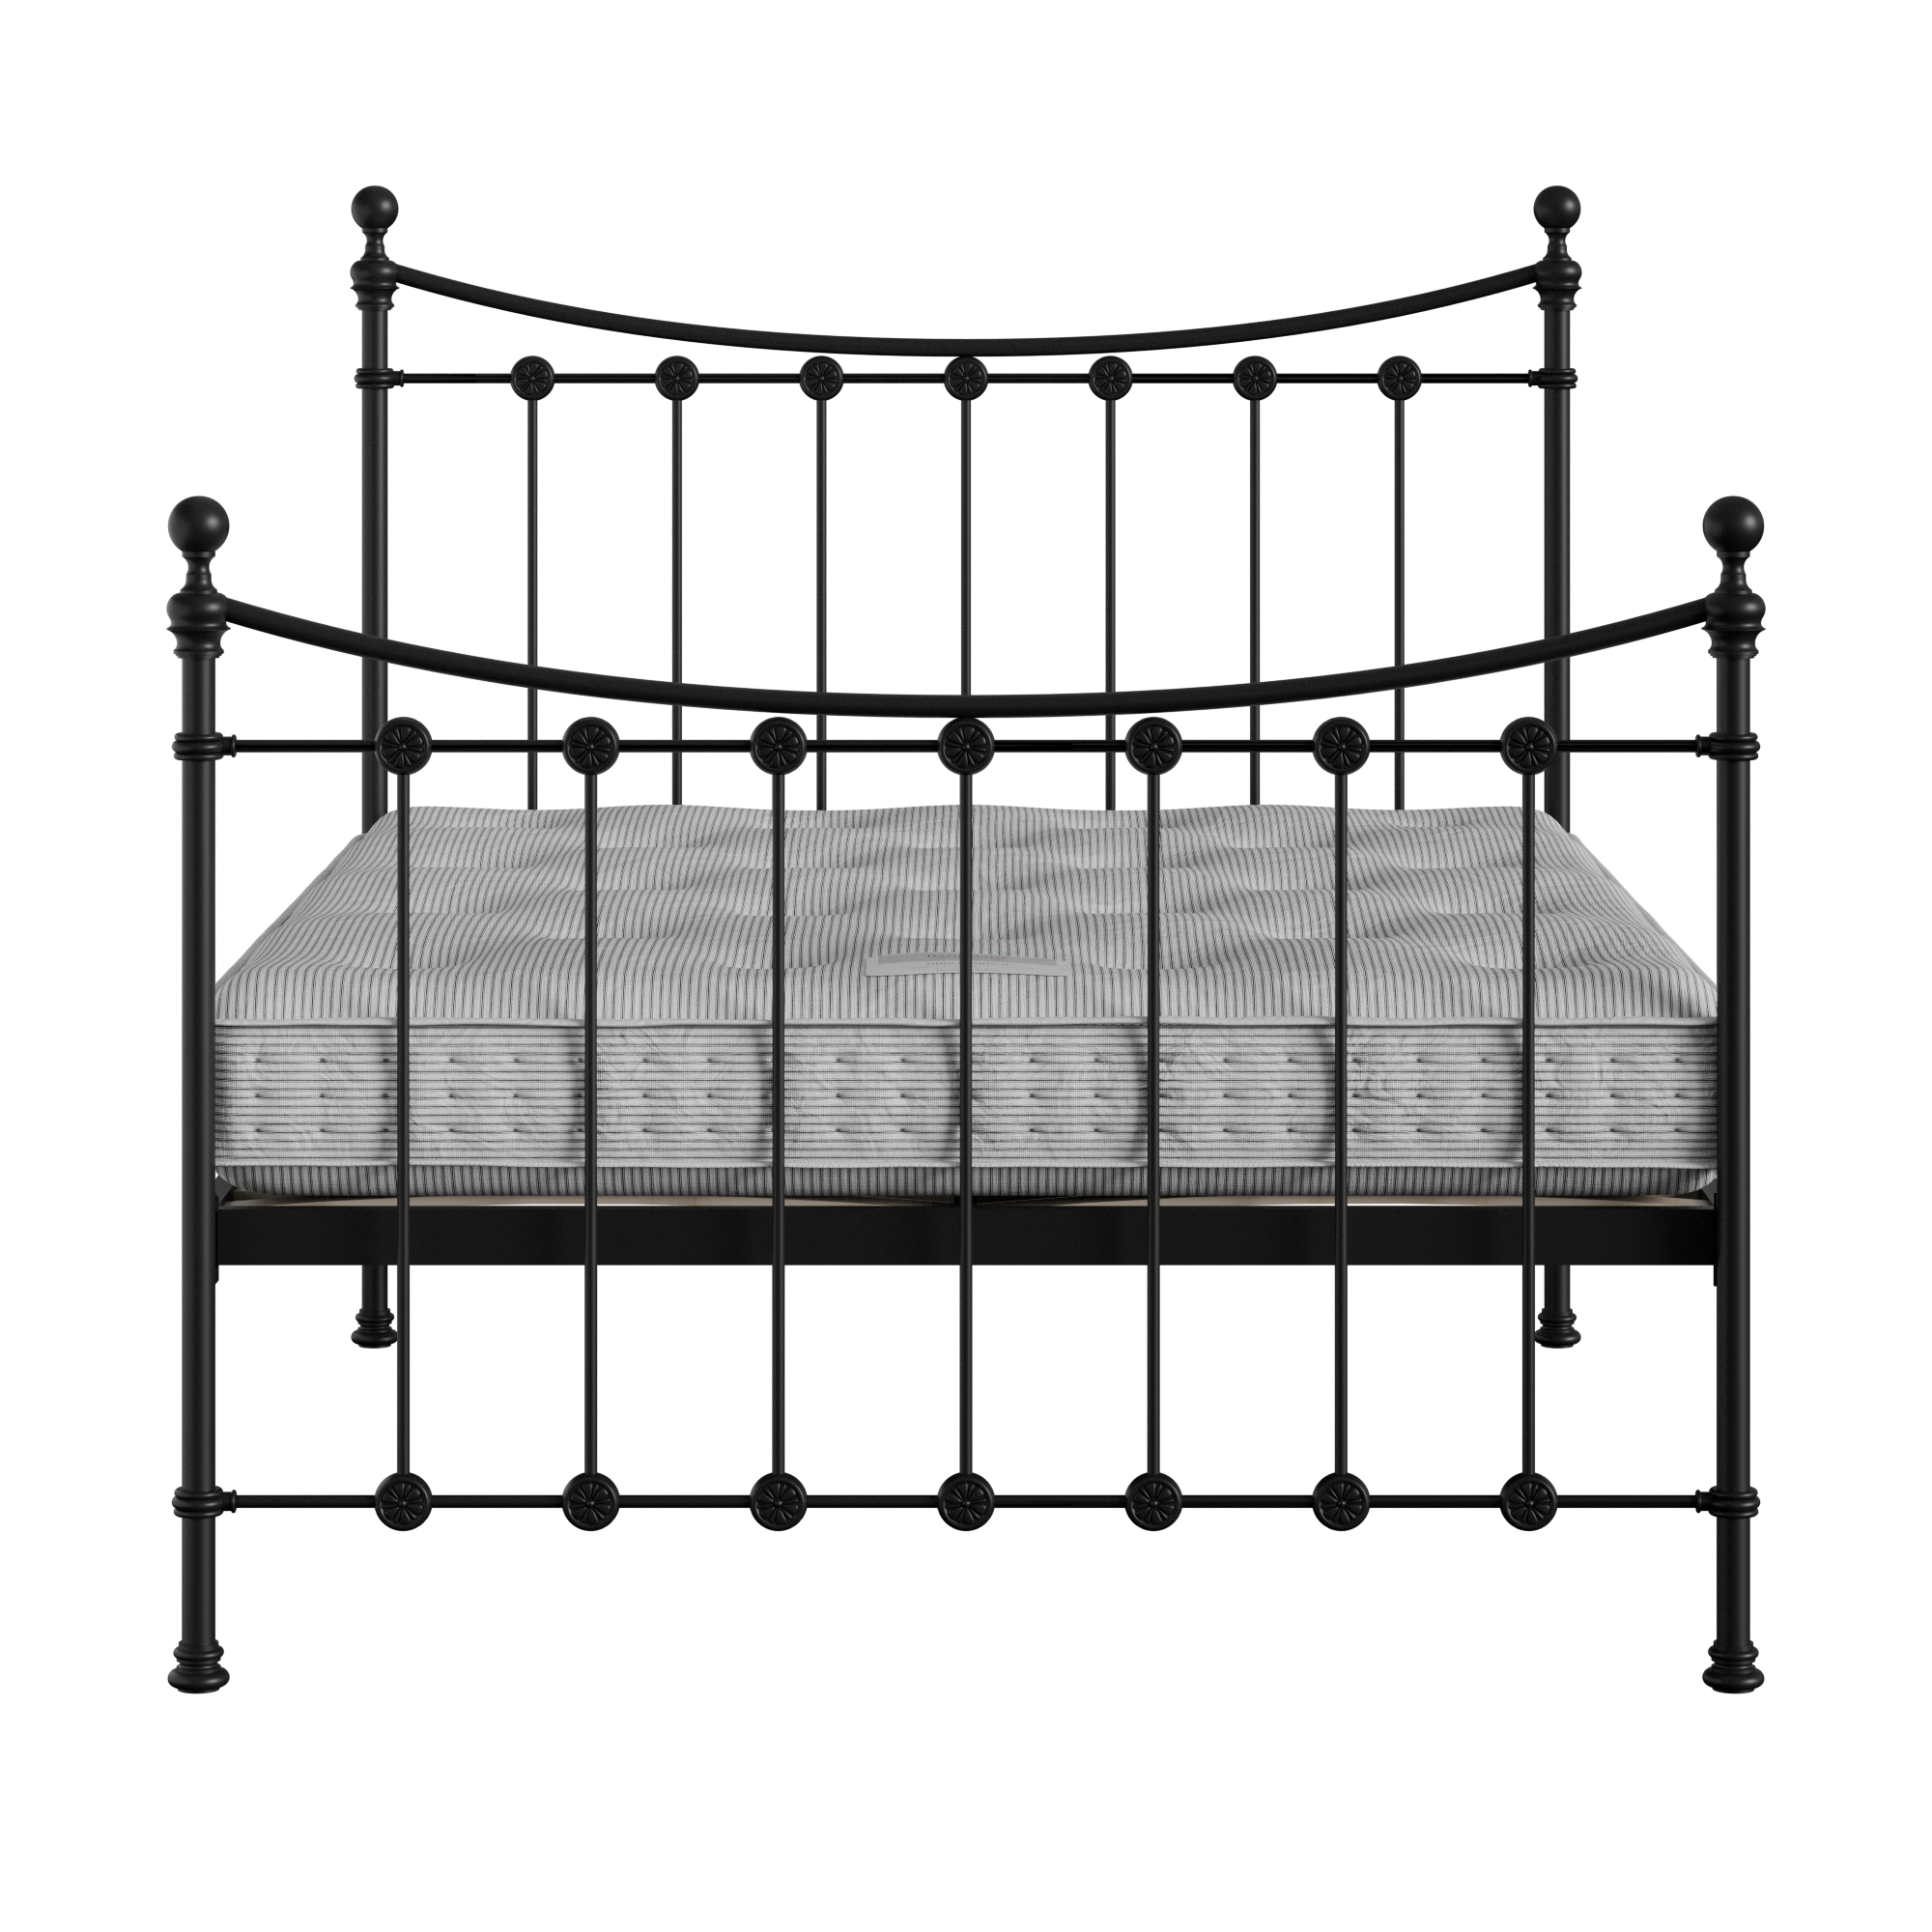 Carrick Solo iron/metal bed in black with Juno mattress